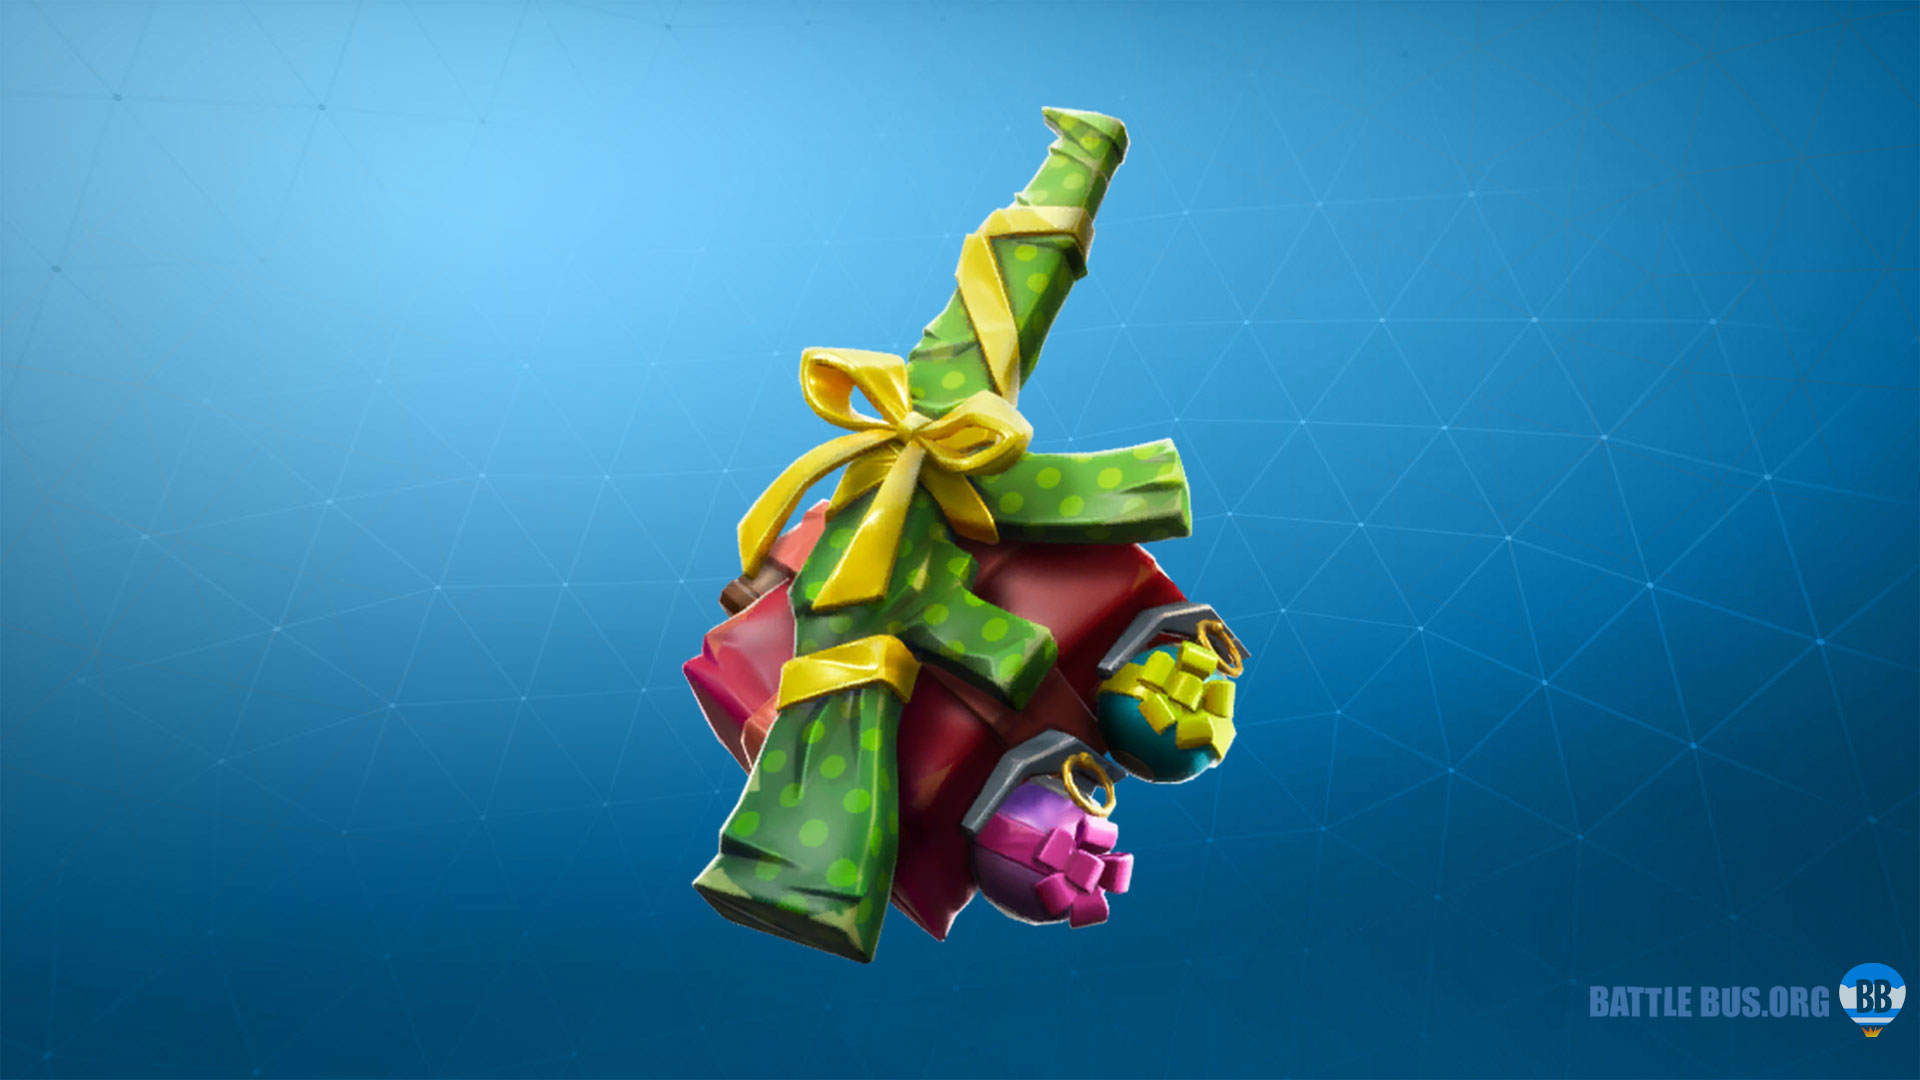 perfect present back bling